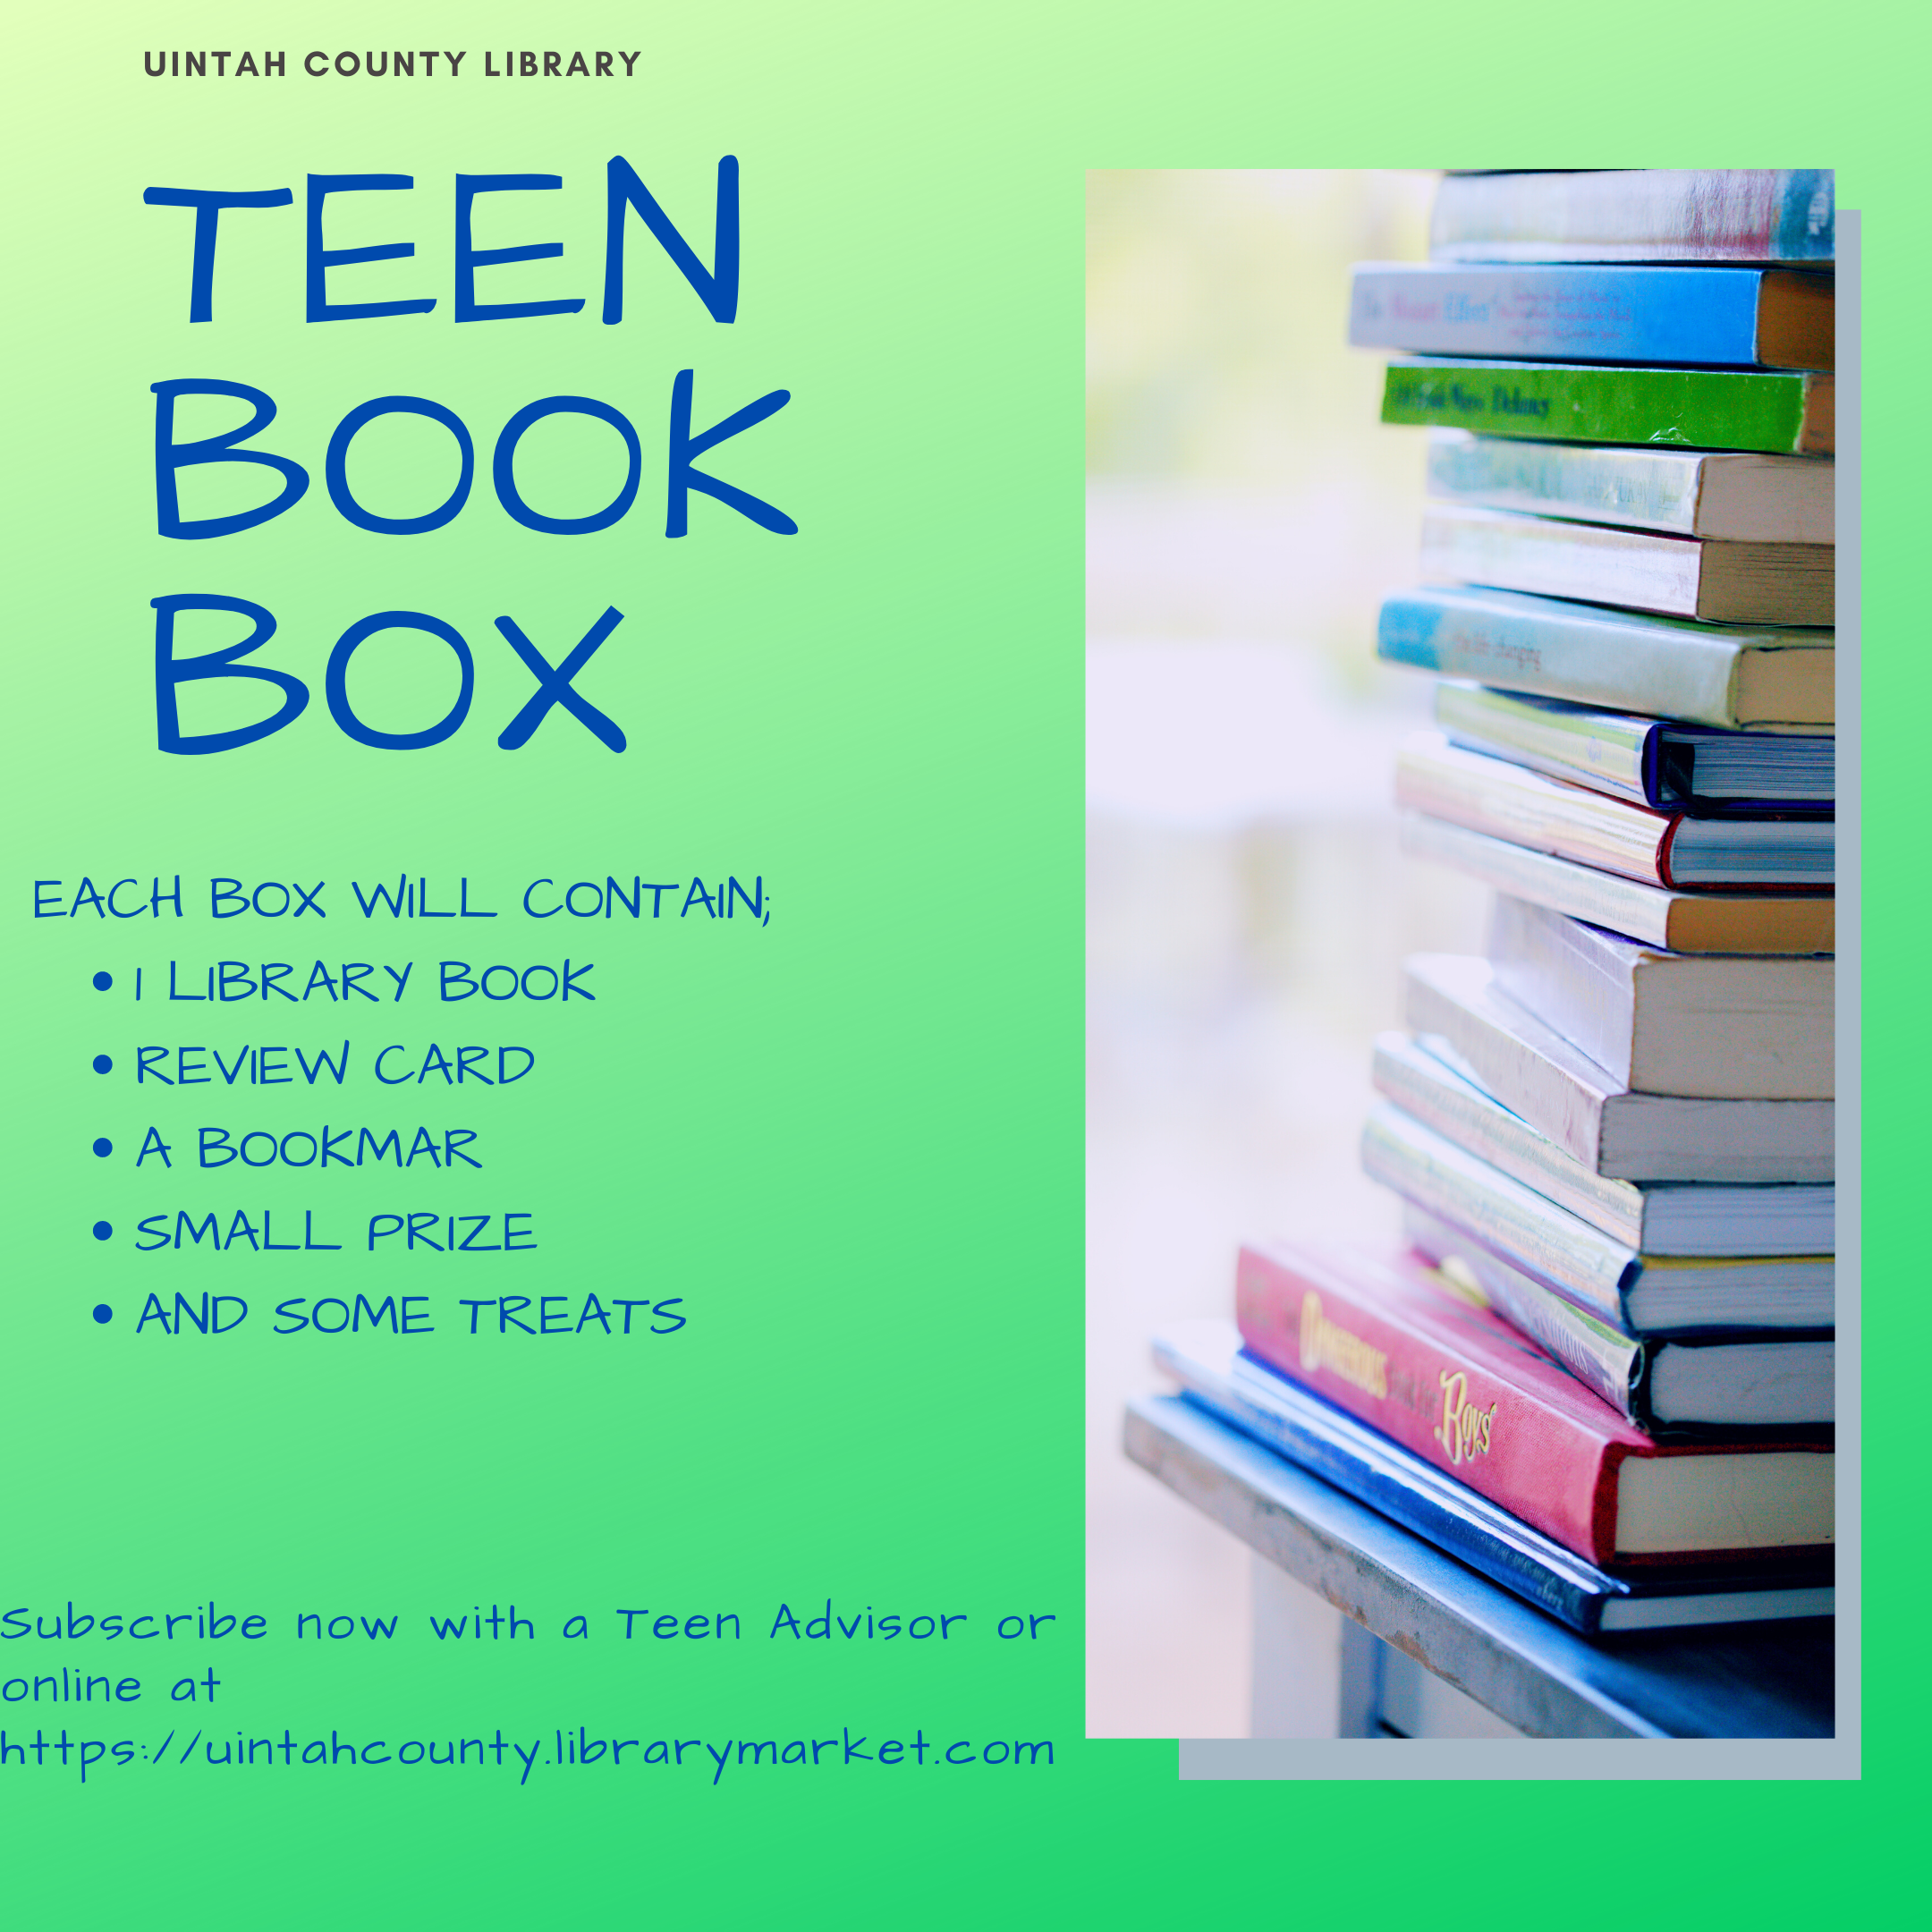 Teen Book Box in blue letters, green background and image of books. 